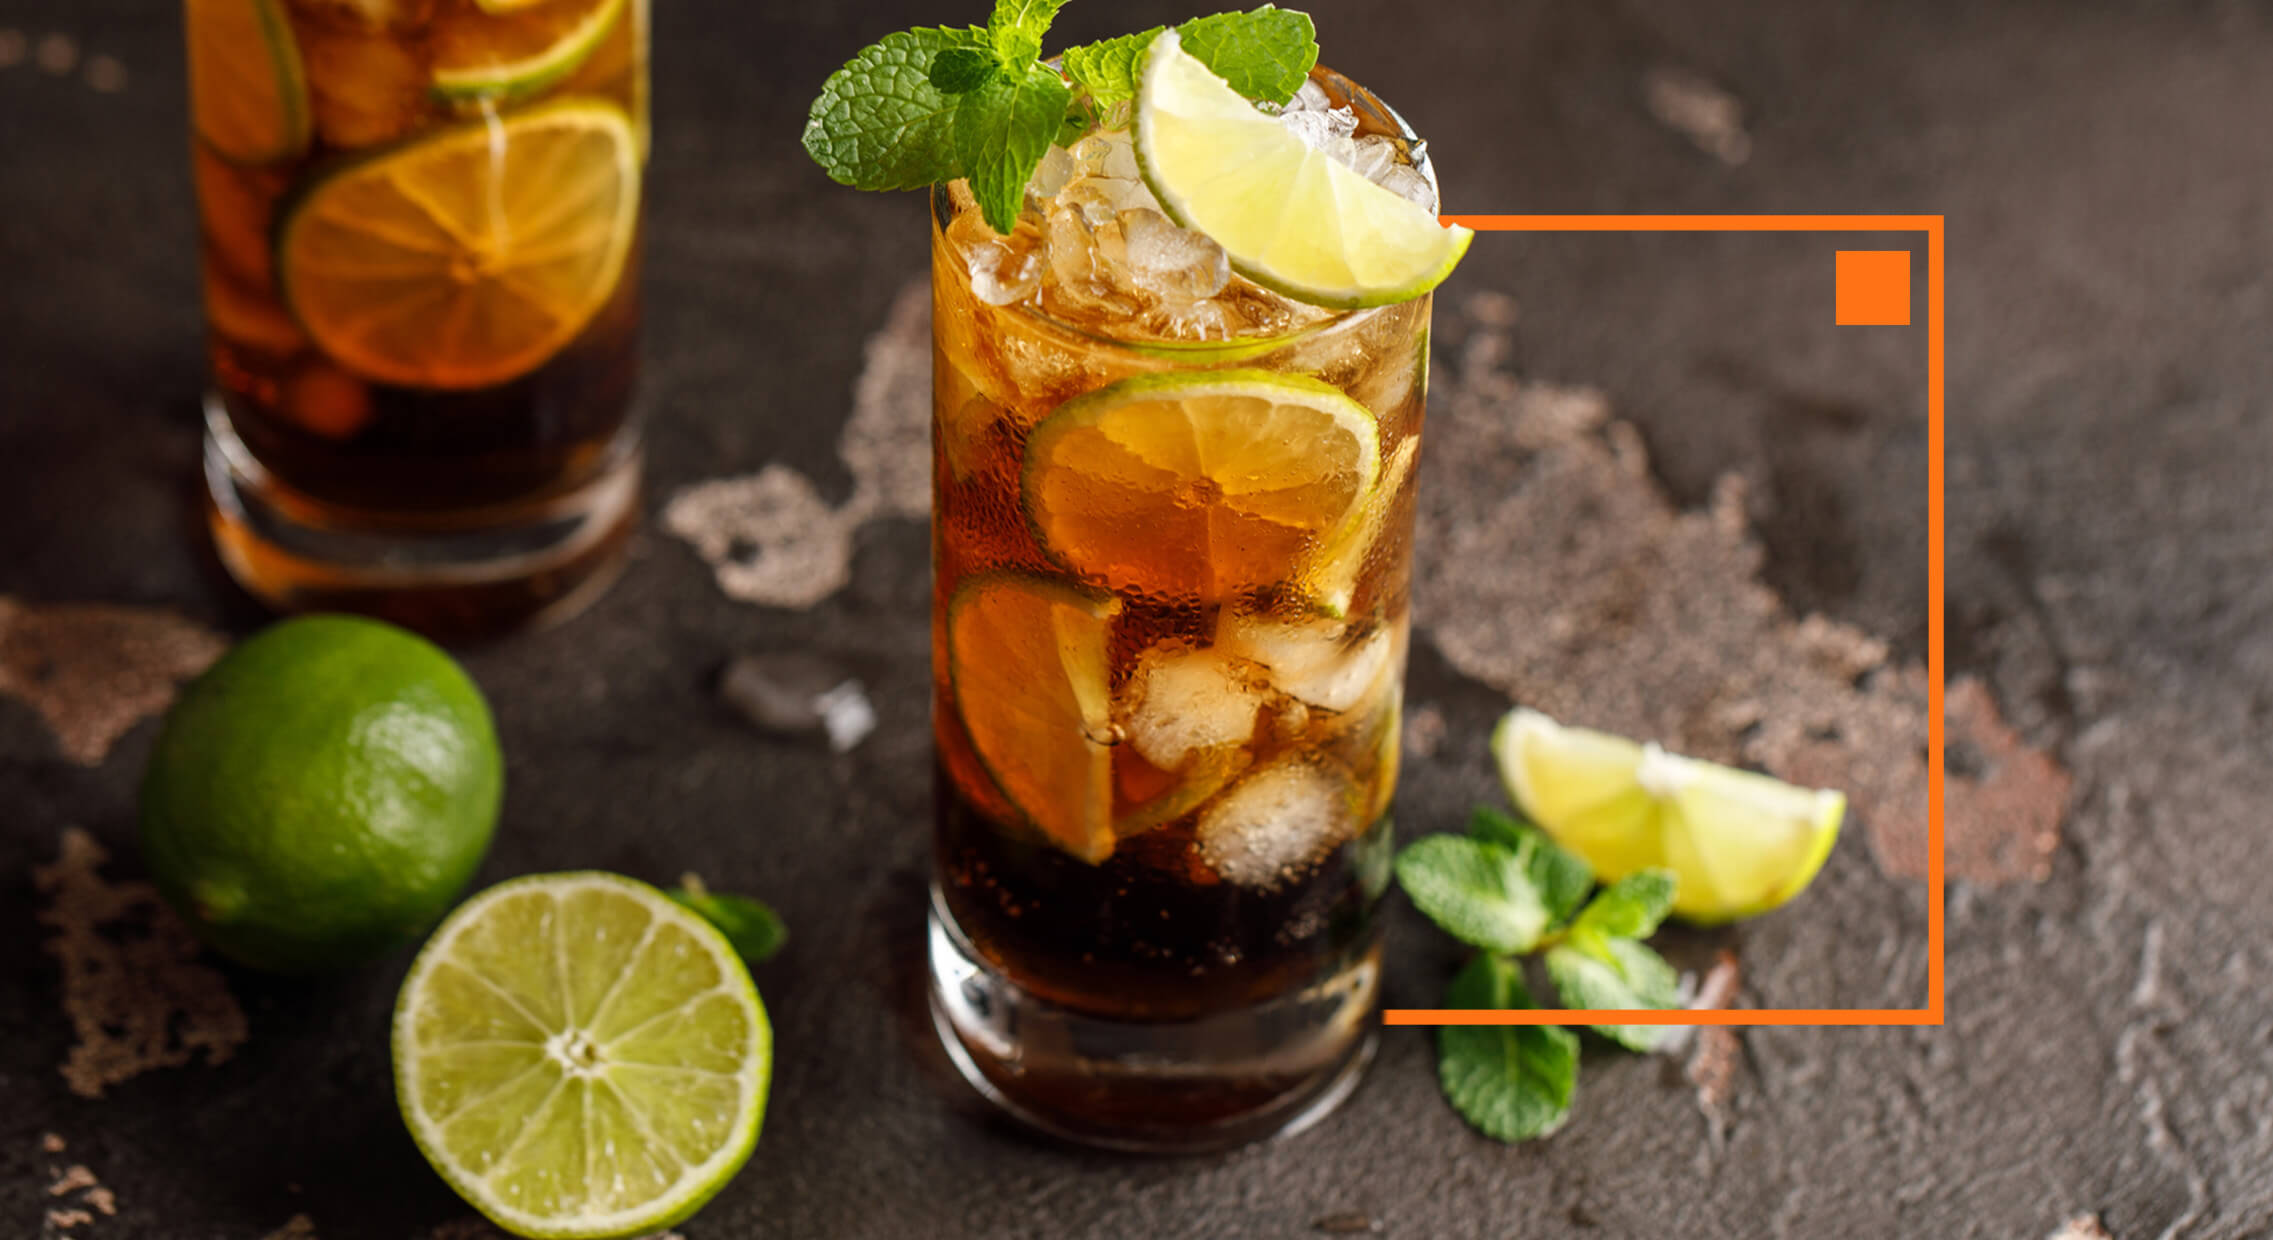 Feature-Spicing-Up-The-Classic-Rum-and-Coke (1)